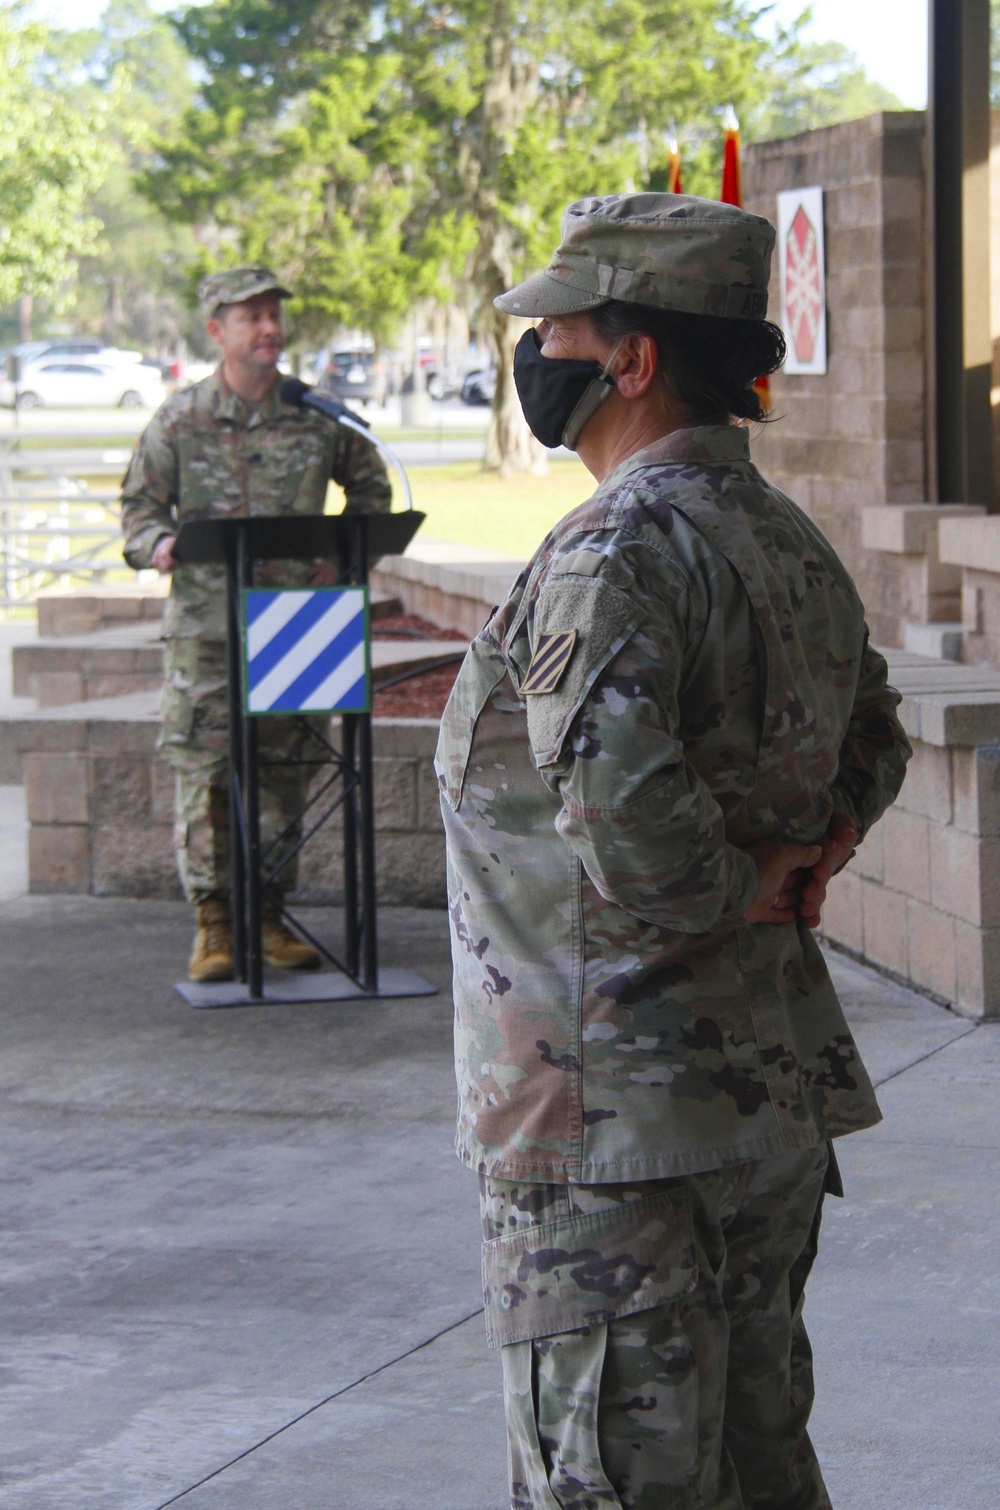 “Legion” Battalion conducts change of responsibility ceremony, Abraham to retire with over 30 years of service